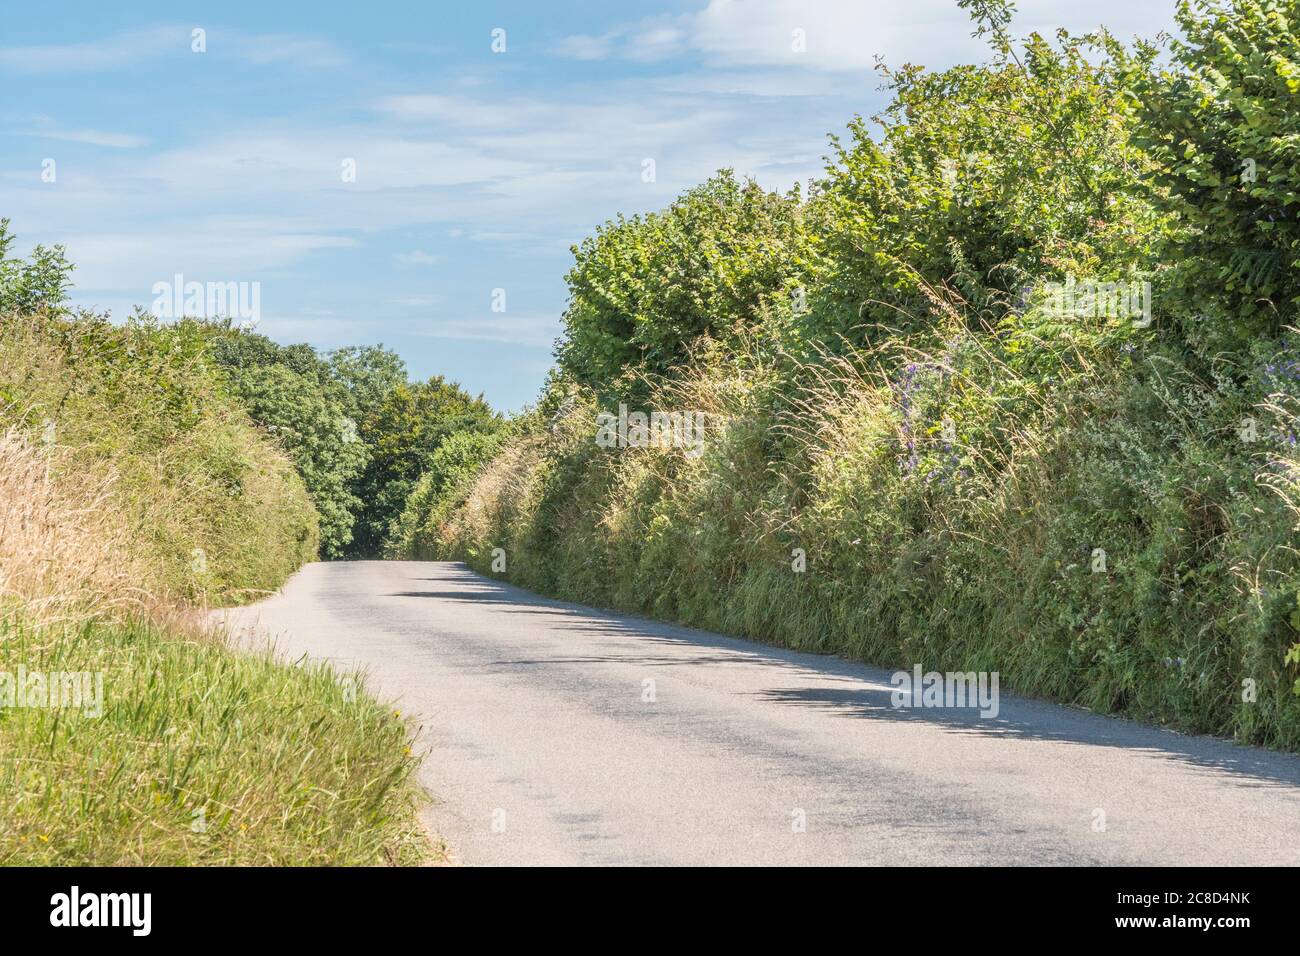 Fern and weed infested Cornwall country road grass verge, with blue Summer sky behind. High banked hedgerows are a common feature of Cornwall roads. Stock Photo